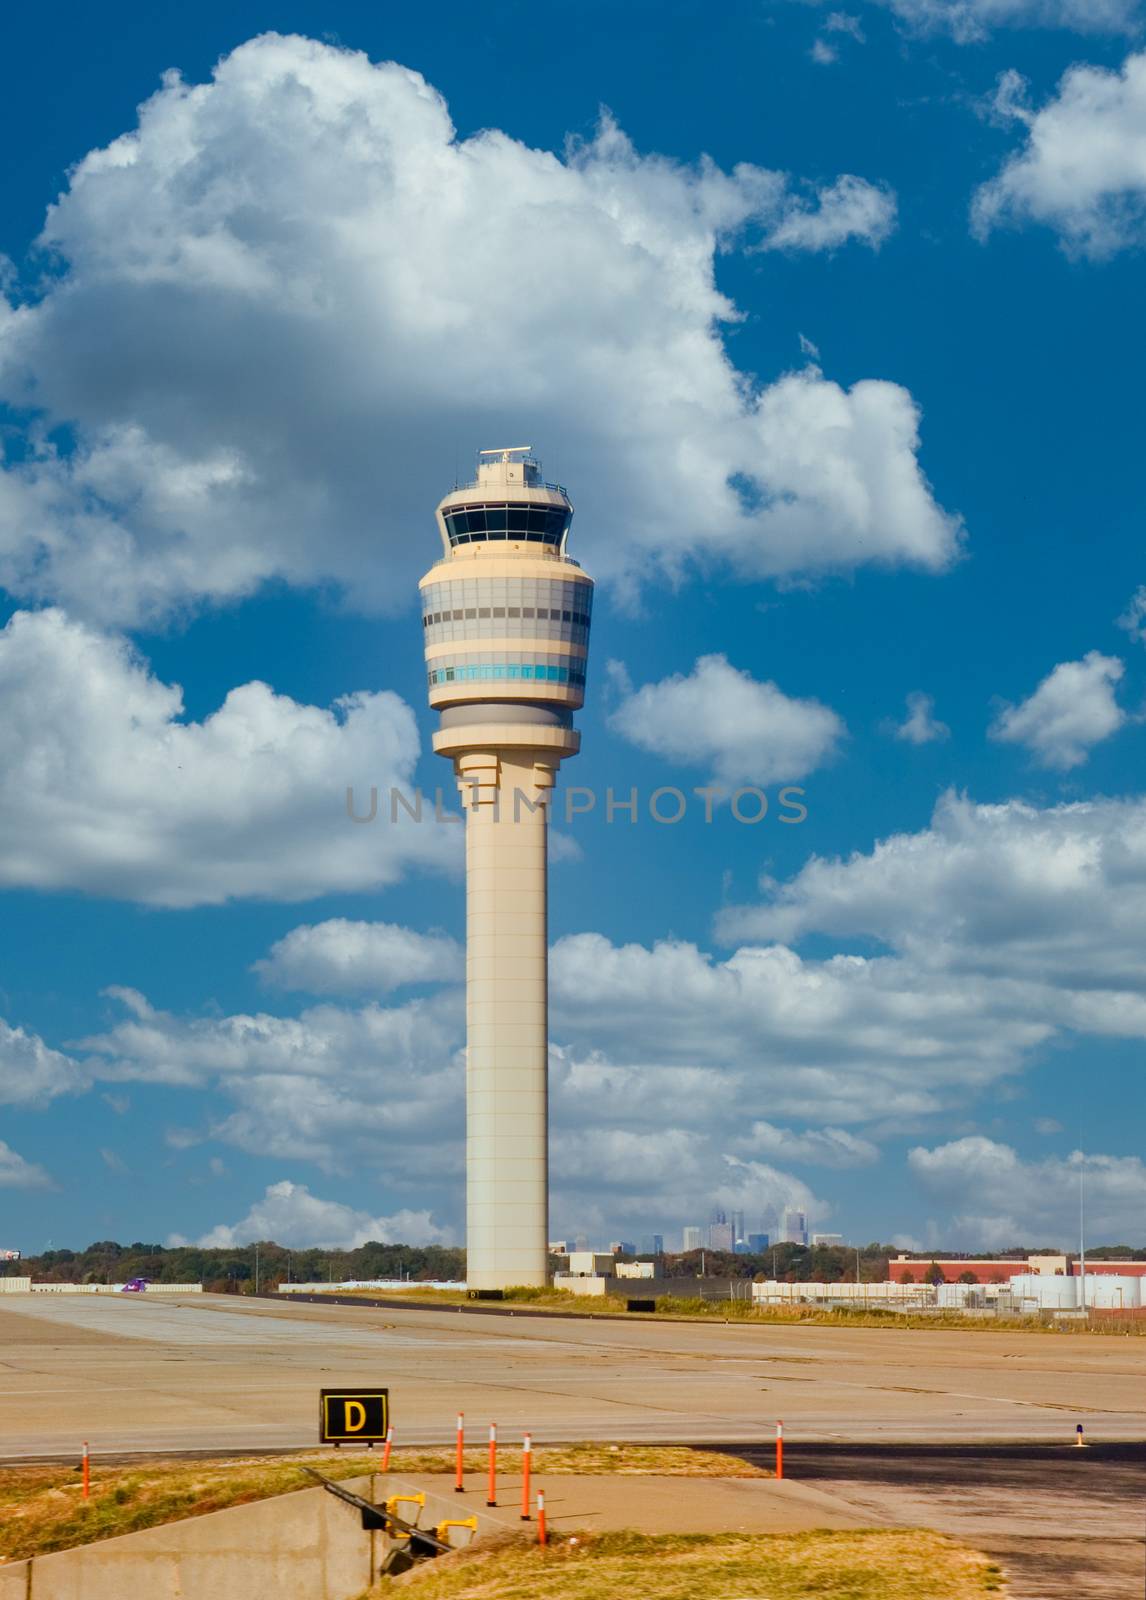 Airport Control Tower Past Runway by dbvirago